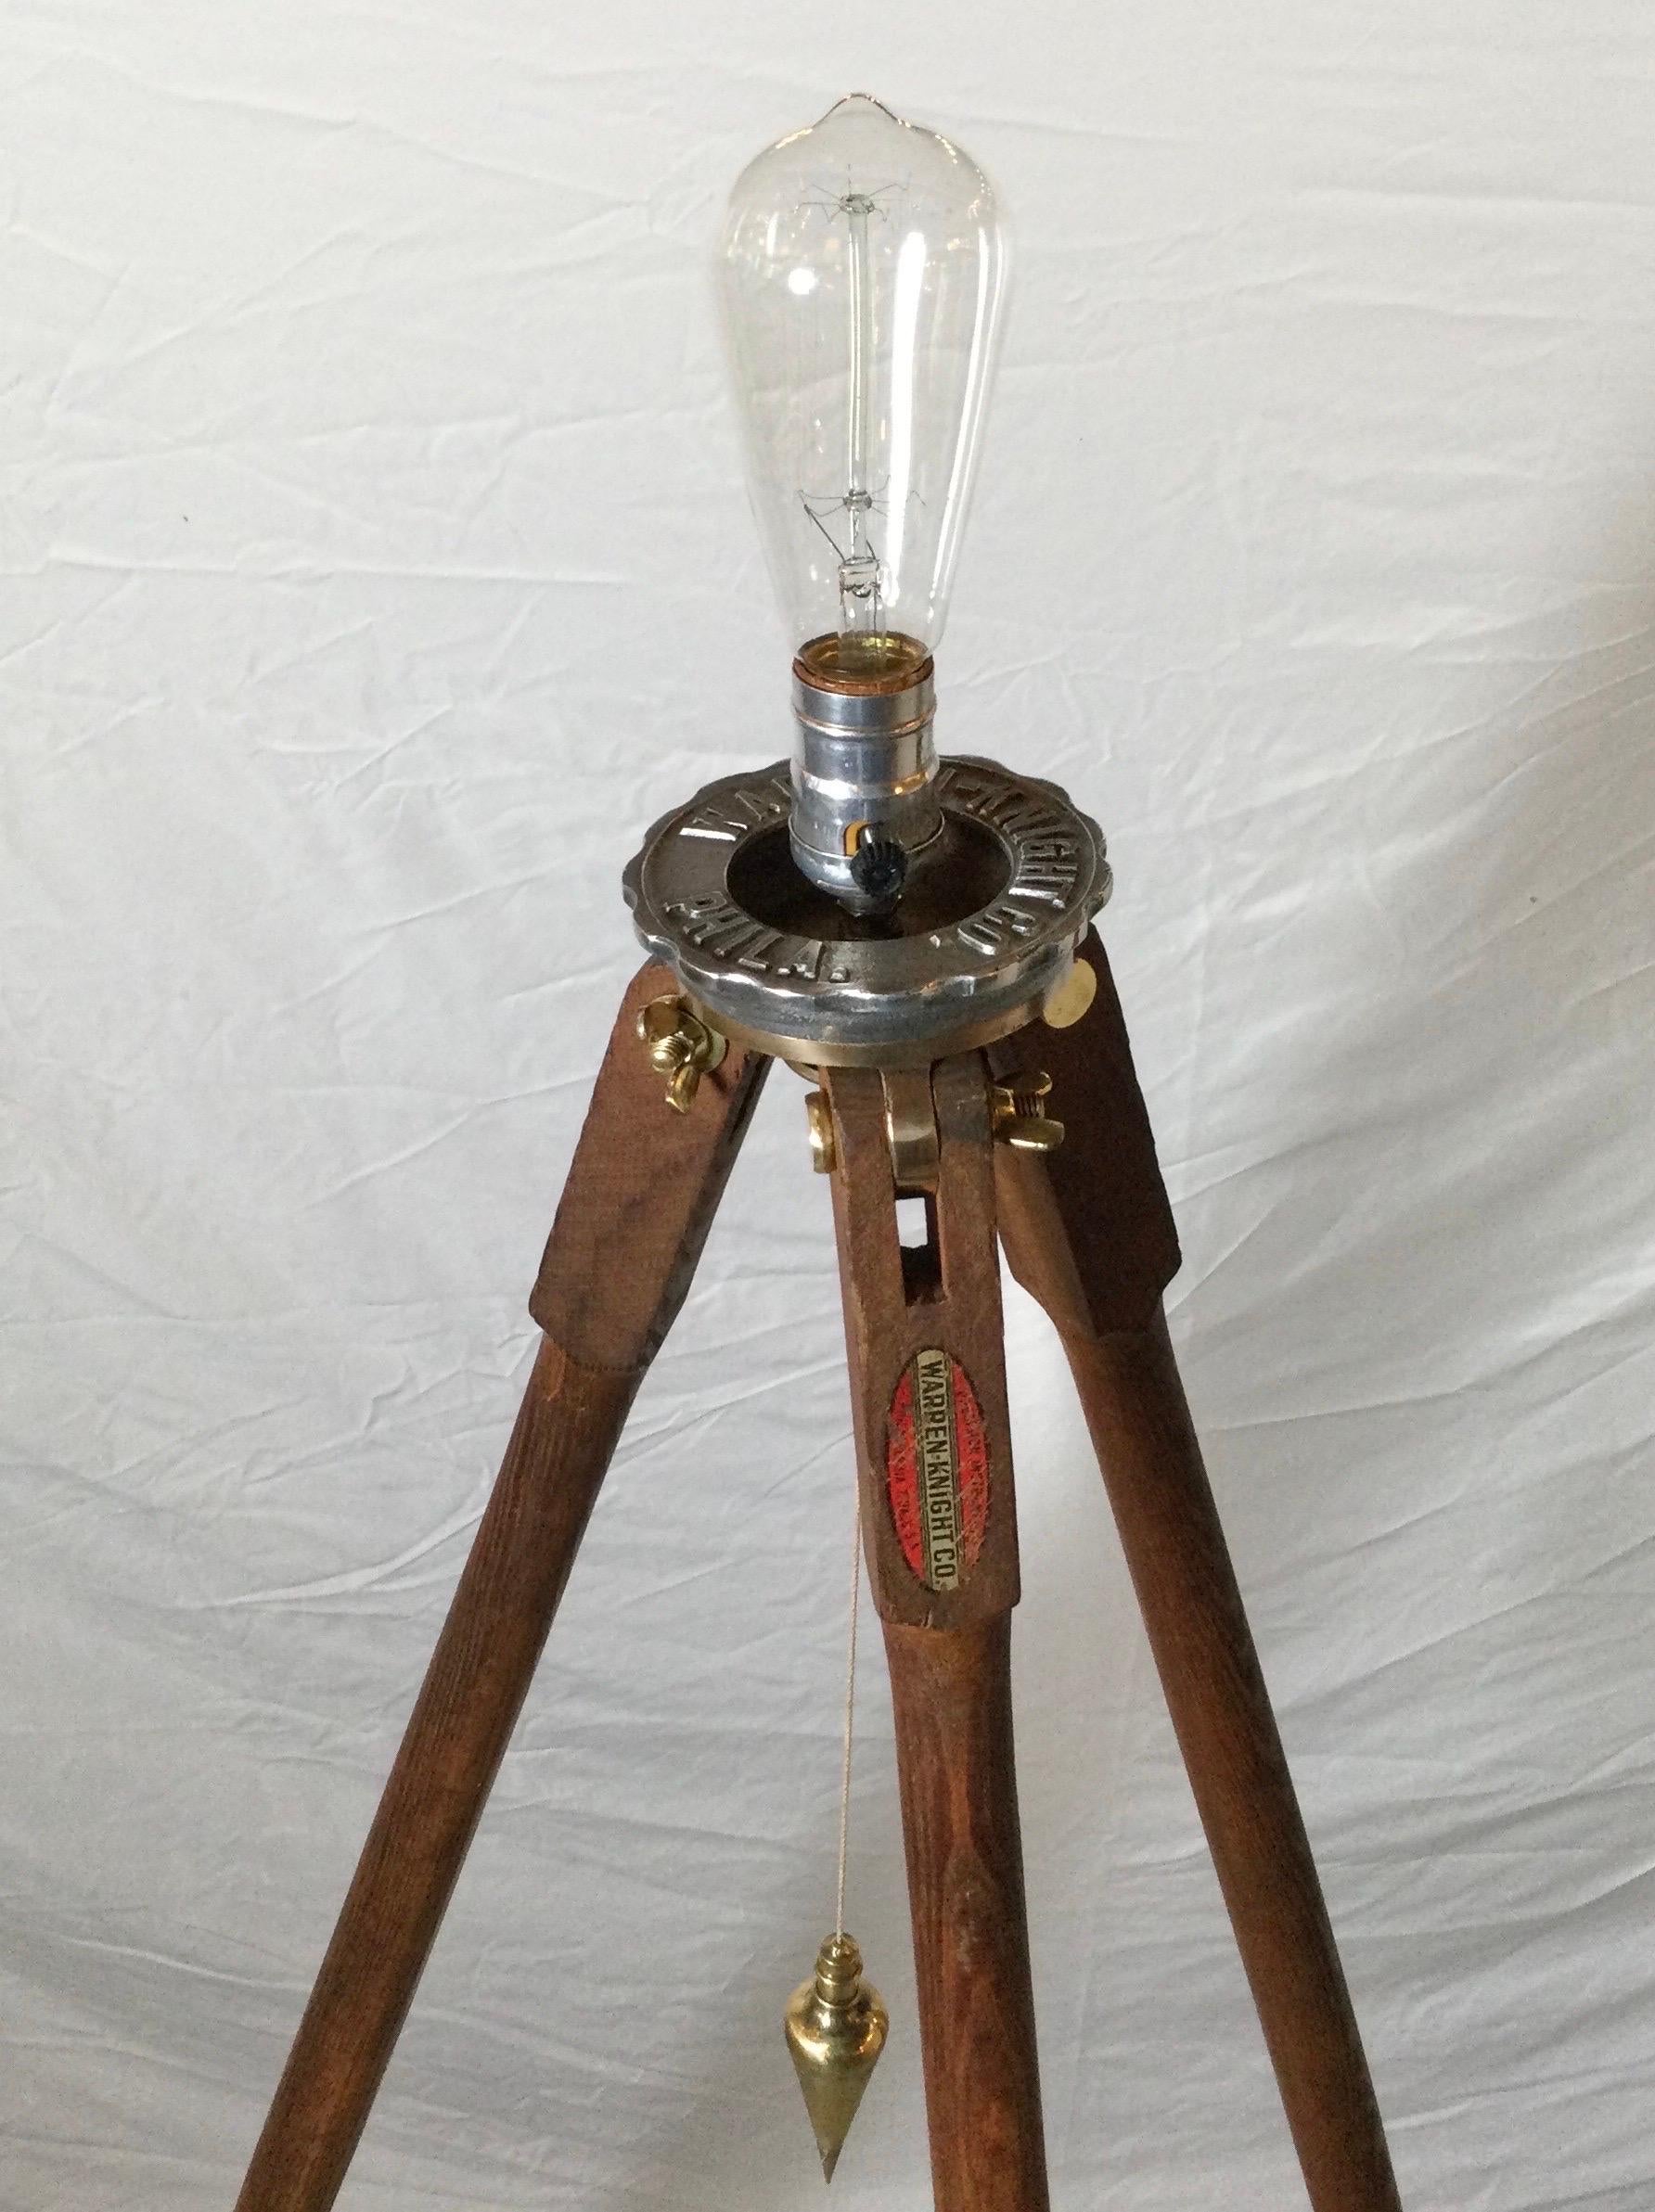 A 1930's wood surveyors tripod now electrified. Made by the Warren Knight Co. Philadelphia, PA. The size is adjustable 56 inches tall.